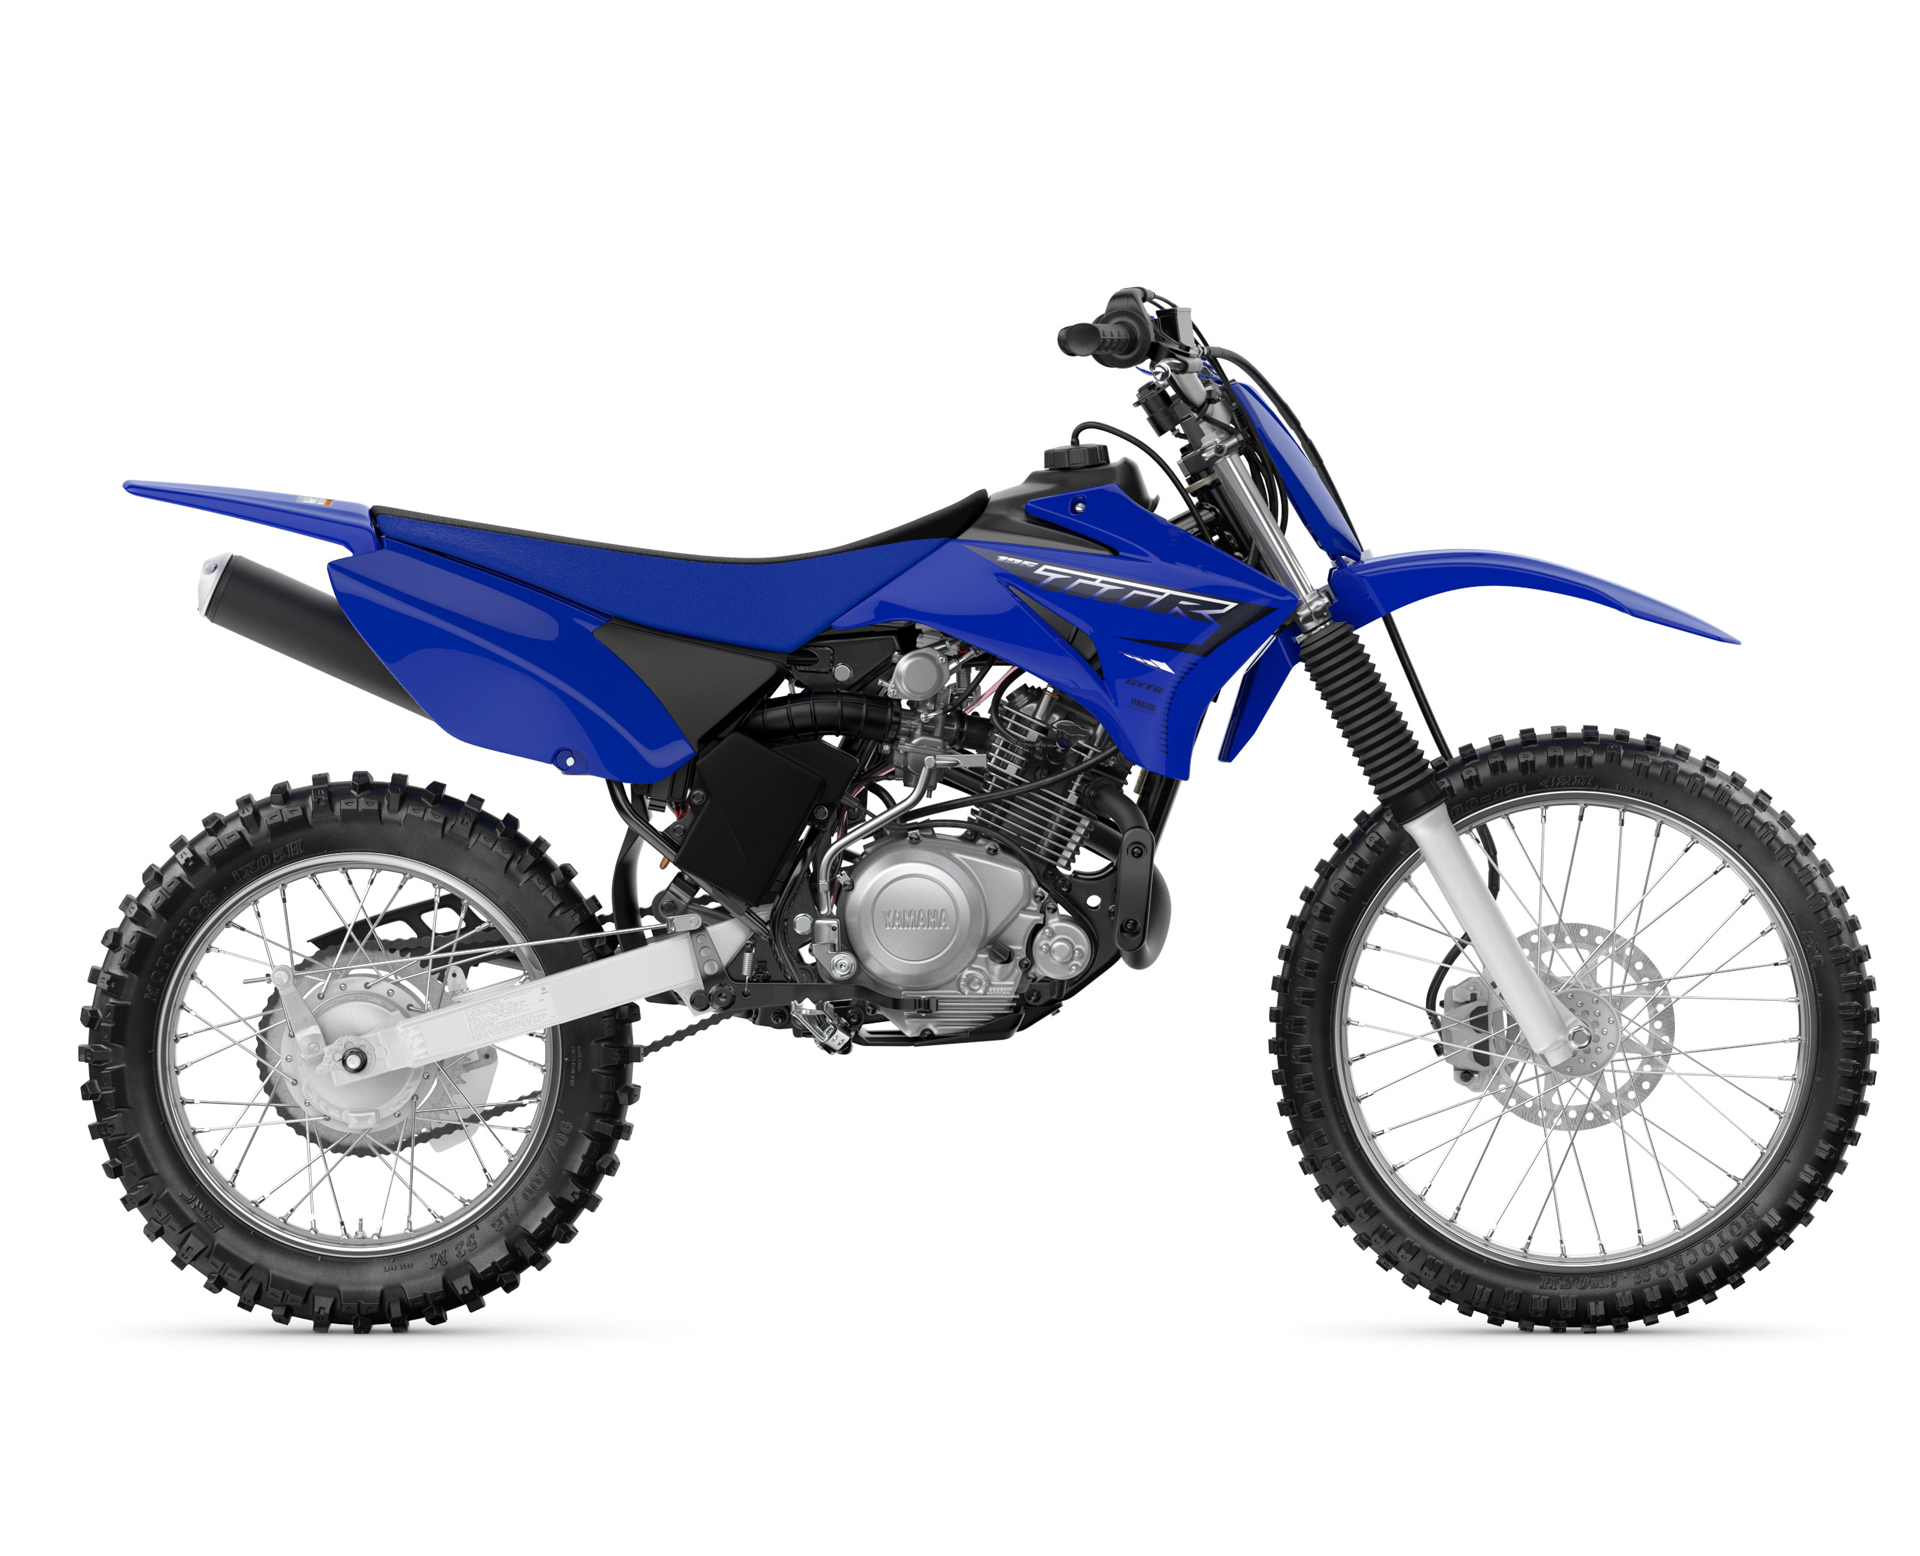 Thumbnail of your customized 2023 TT-R 125